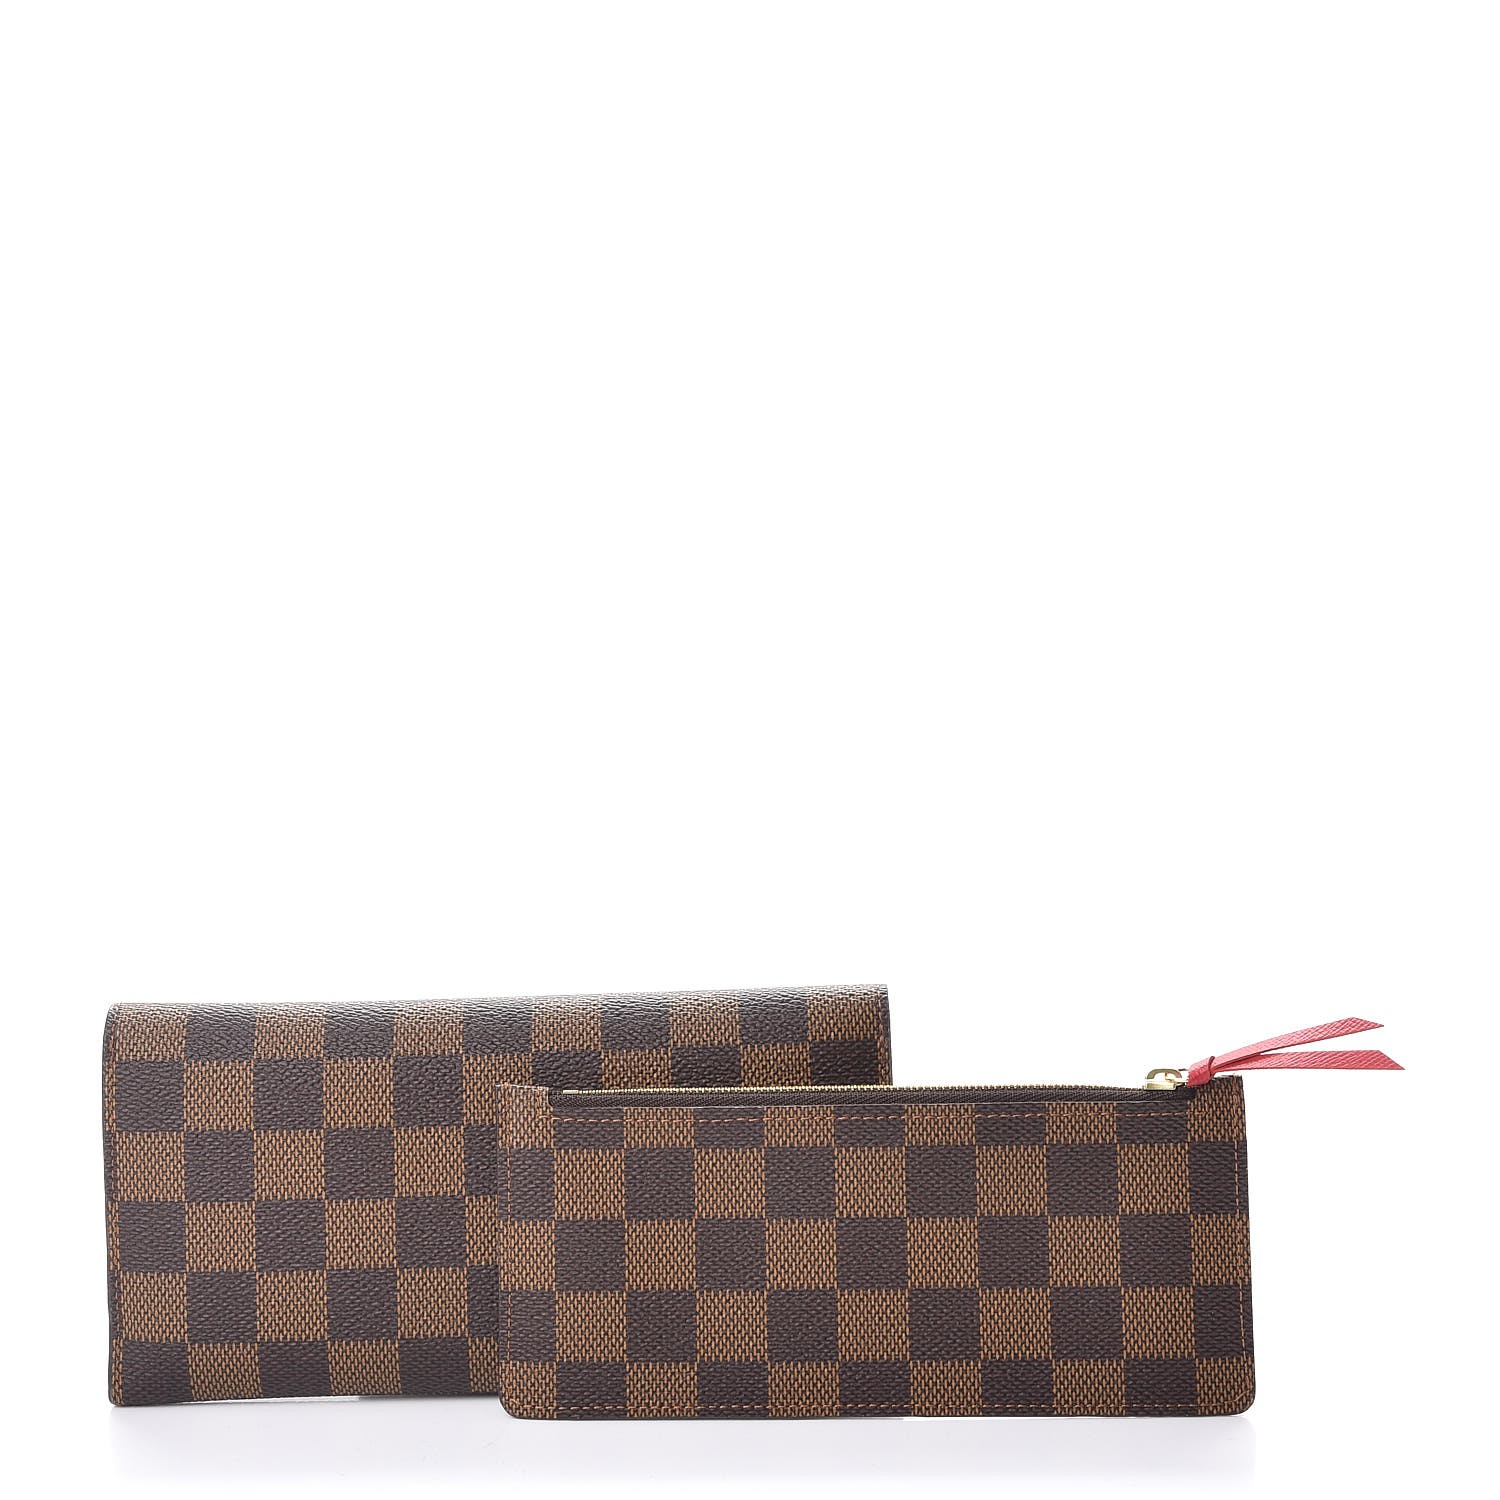 Louis Vuitton Emilie Wallet with red accents